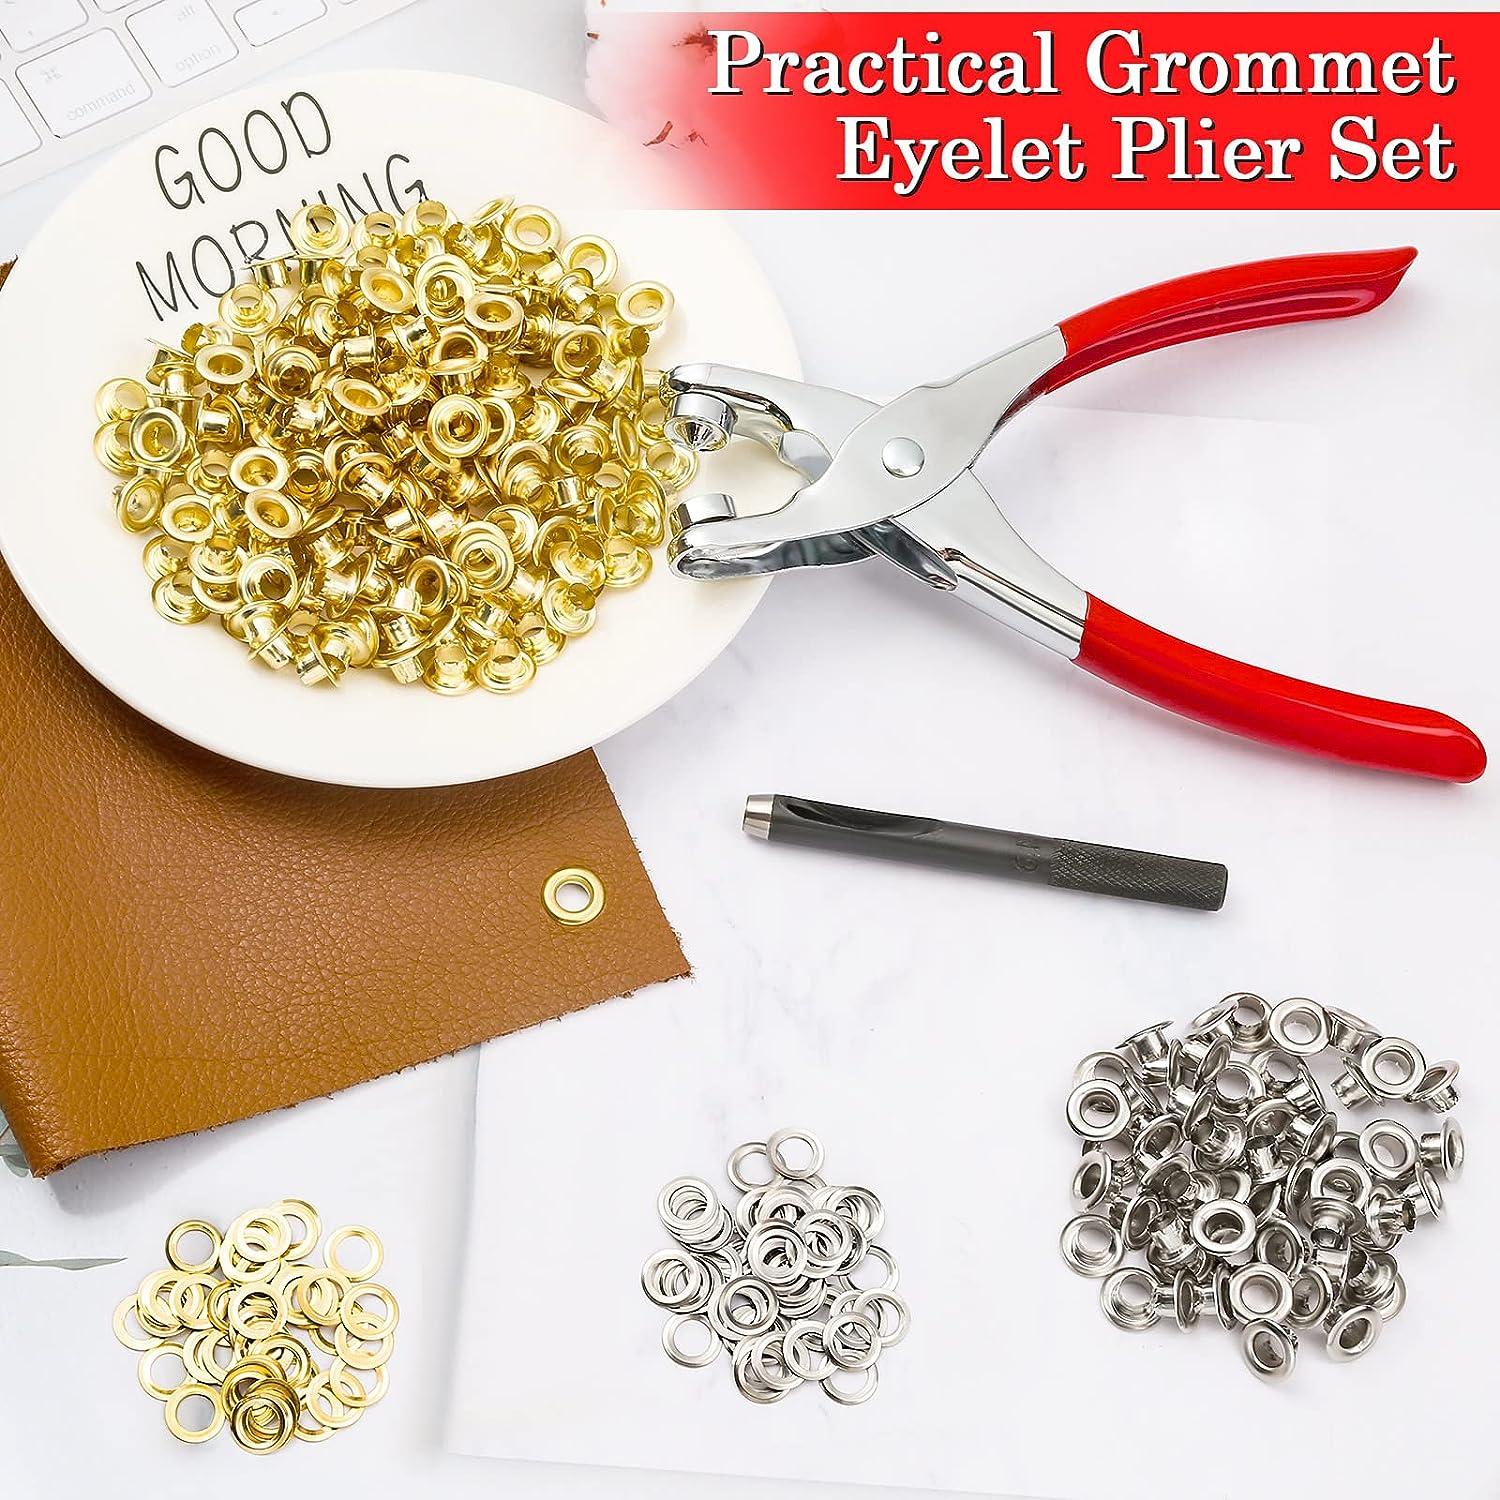  1/4 Grommet Eyelet Setting Pliers with 100 Silver Grommets :  Arts, Crafts & Sewing